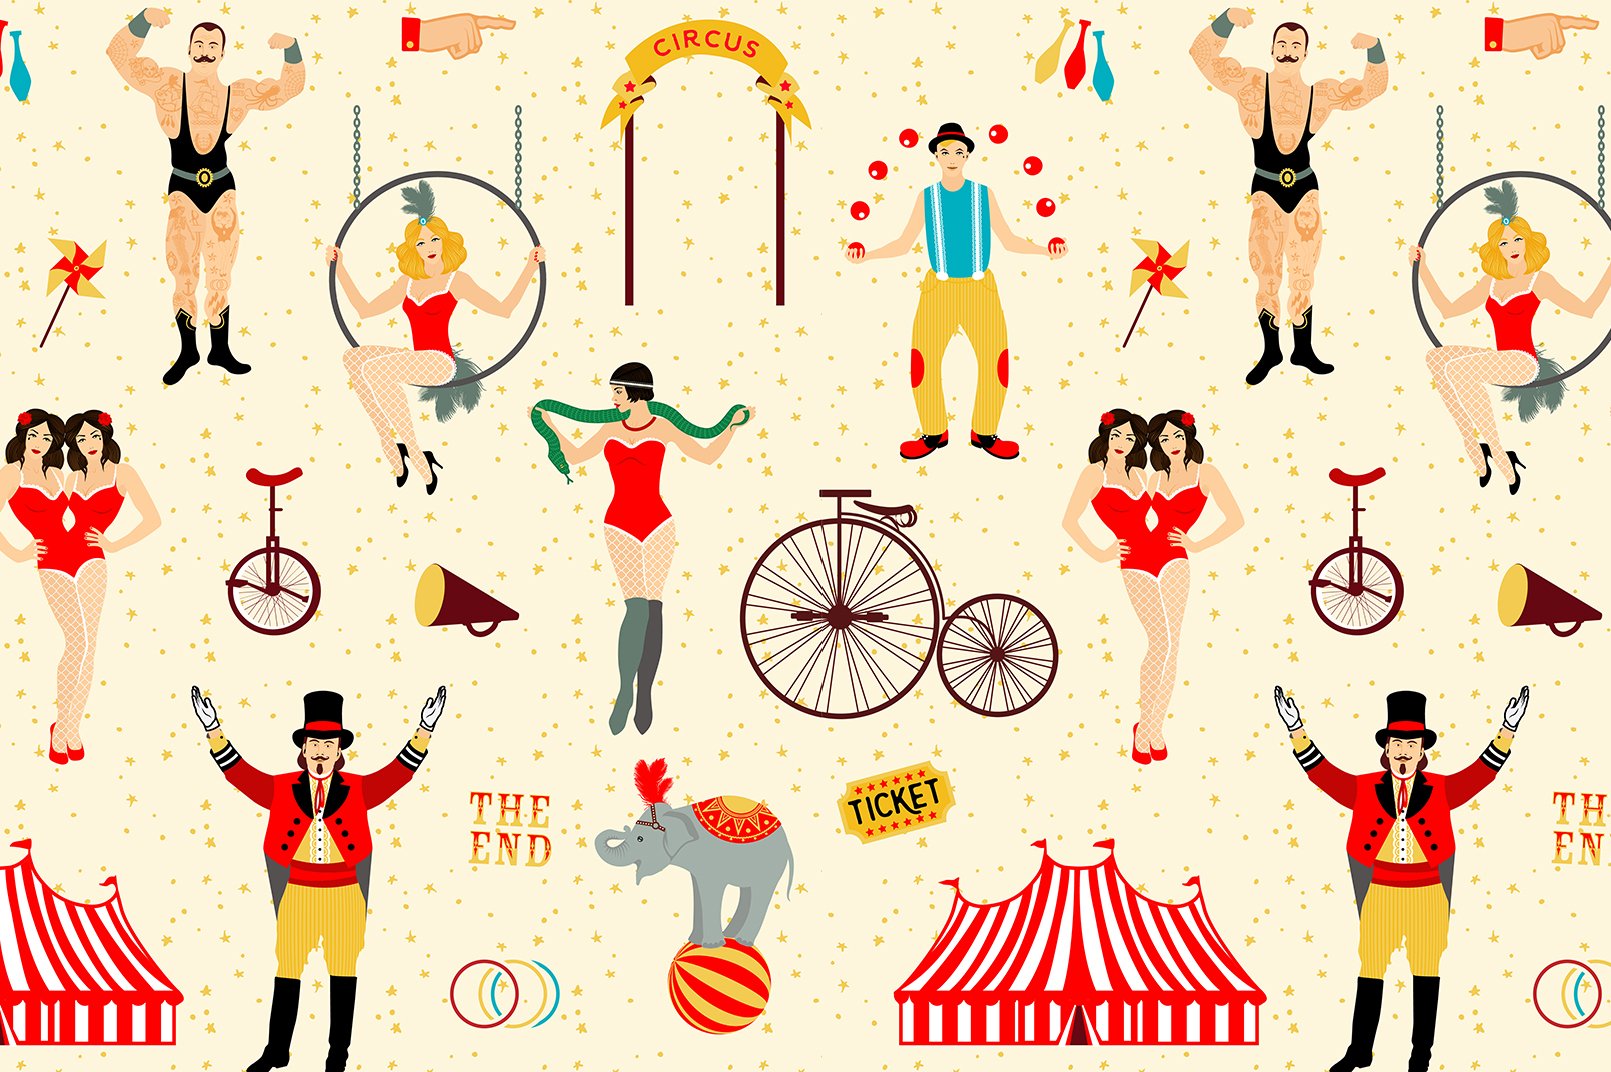 Beige background with lots of circus elements.